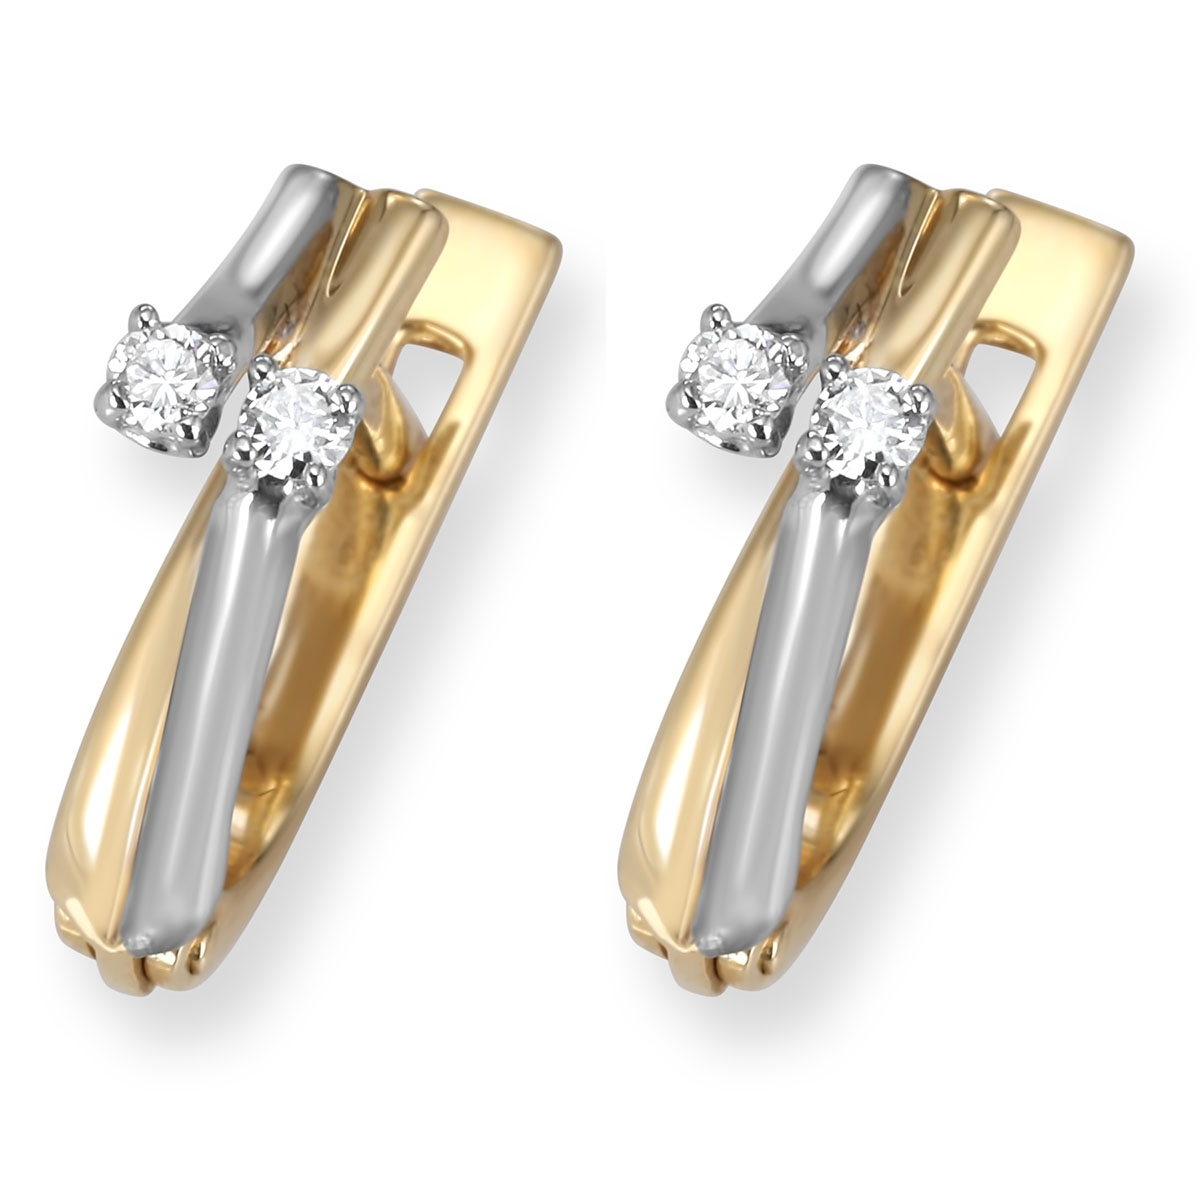 Anbinder Two-Tone 14K Gold Contemporary Bypass Earrings with Diamond Accents - 1